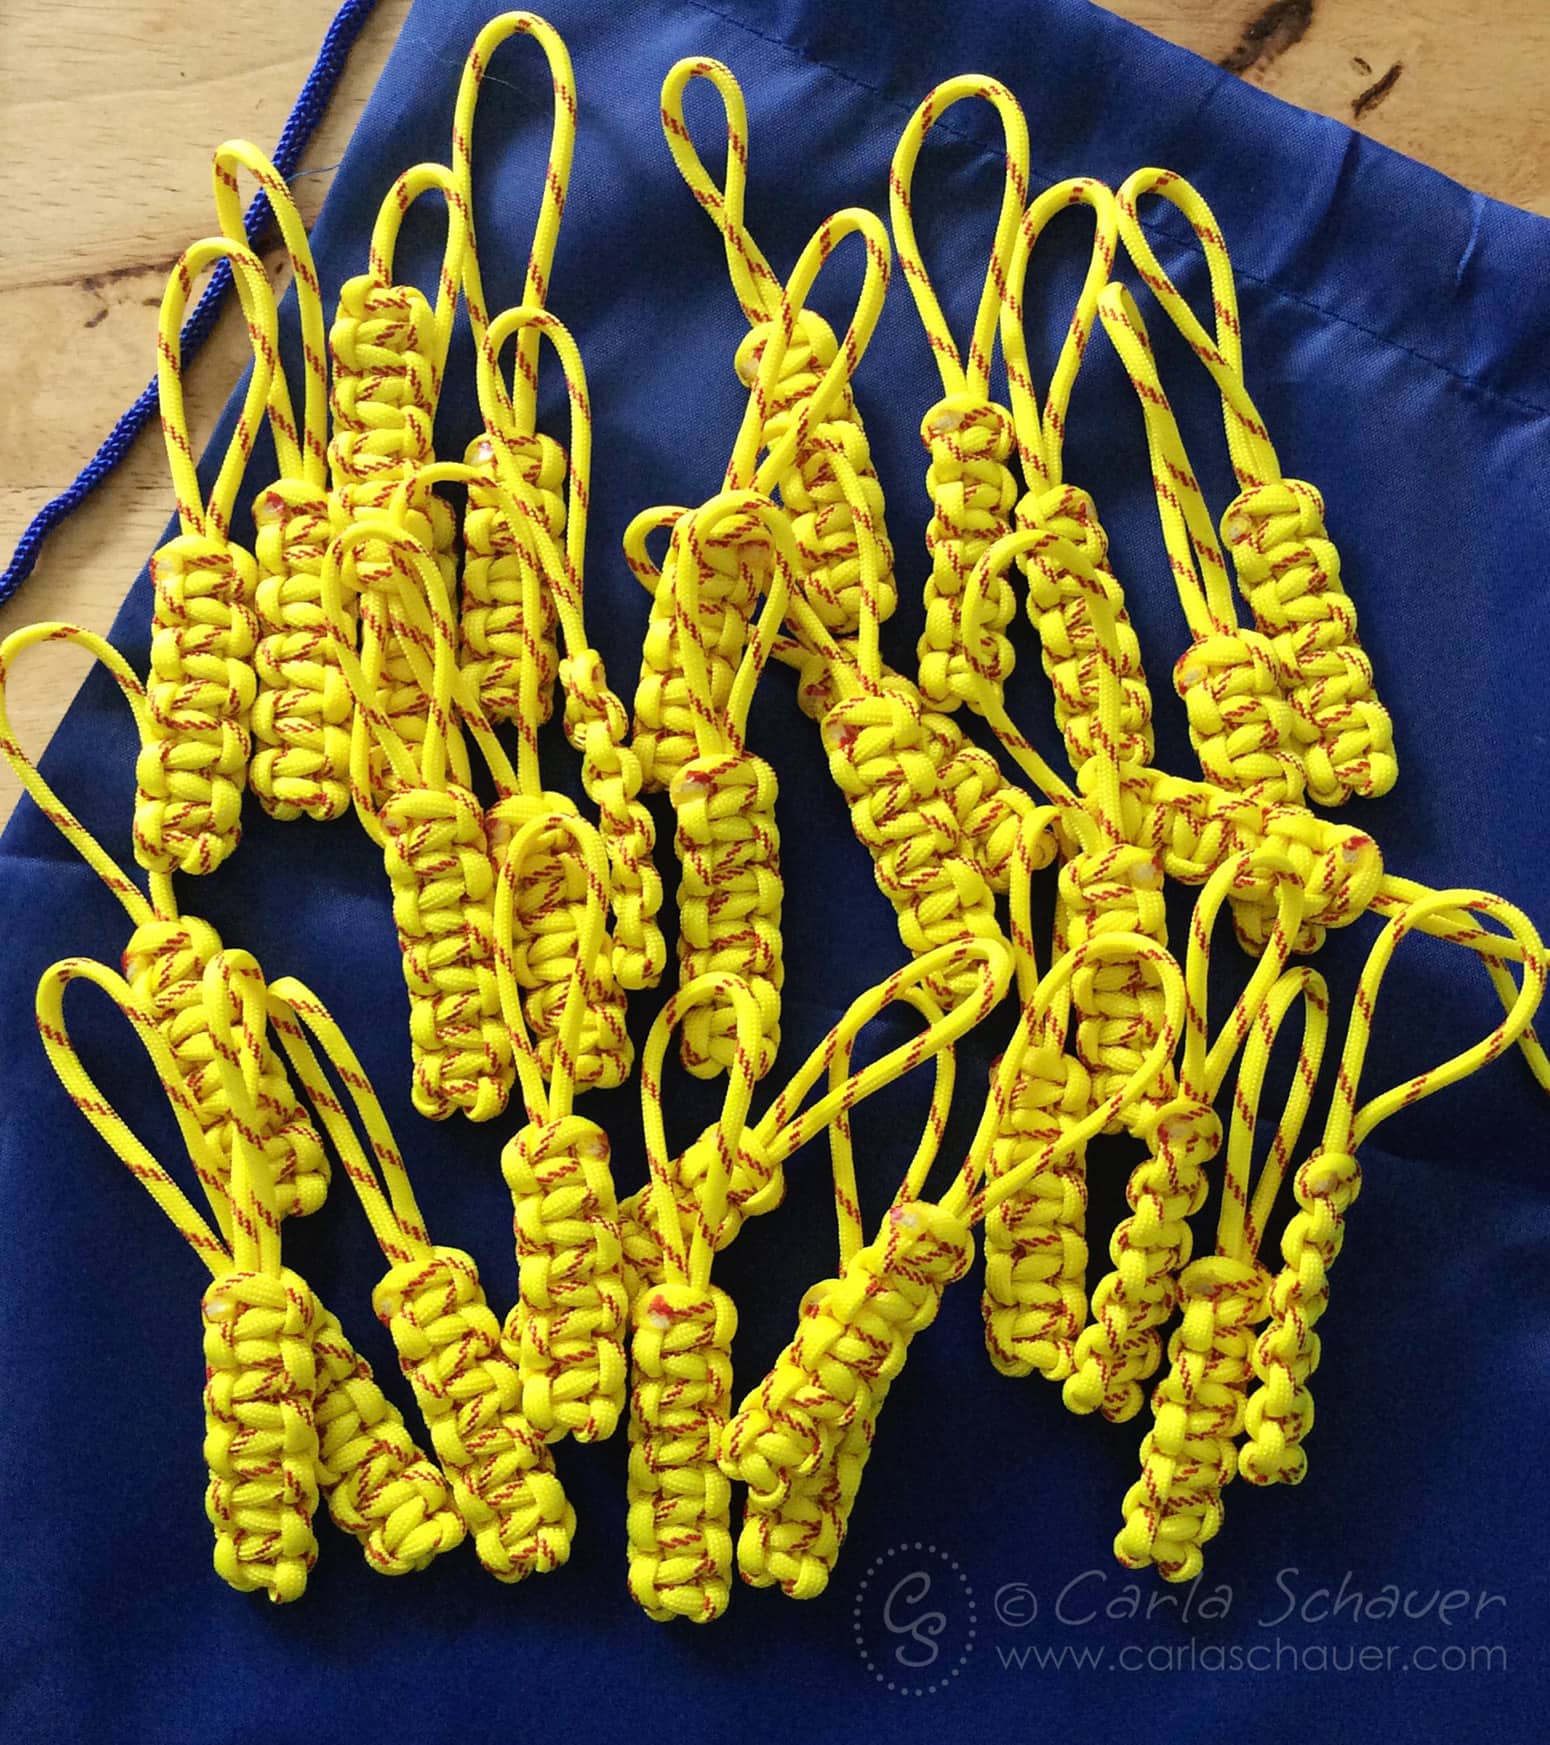 DIY Softball Keychains made from Paracord for Softball Gifts.